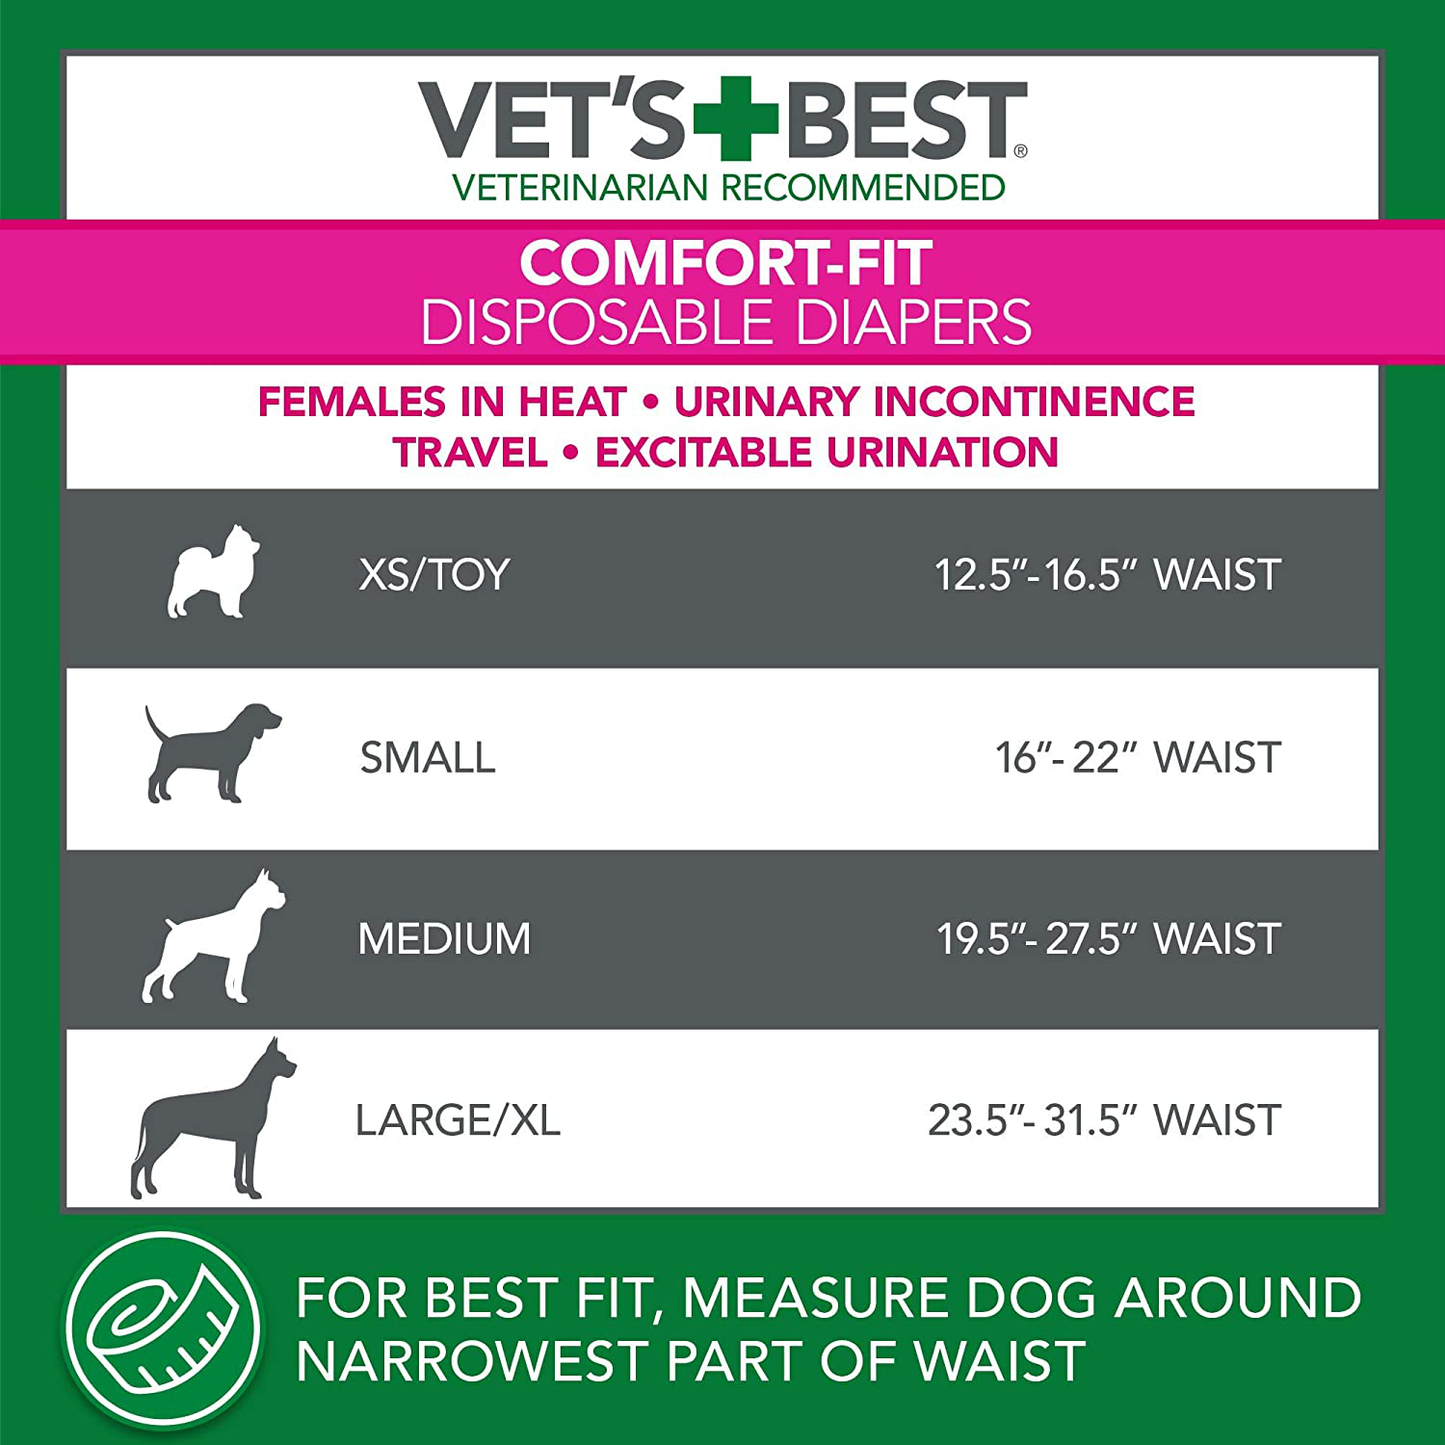 Vet'S Best Comfort Fit Dog Diapers Disposable Female Dog Diapers Absorbent with Leak Proof Fit